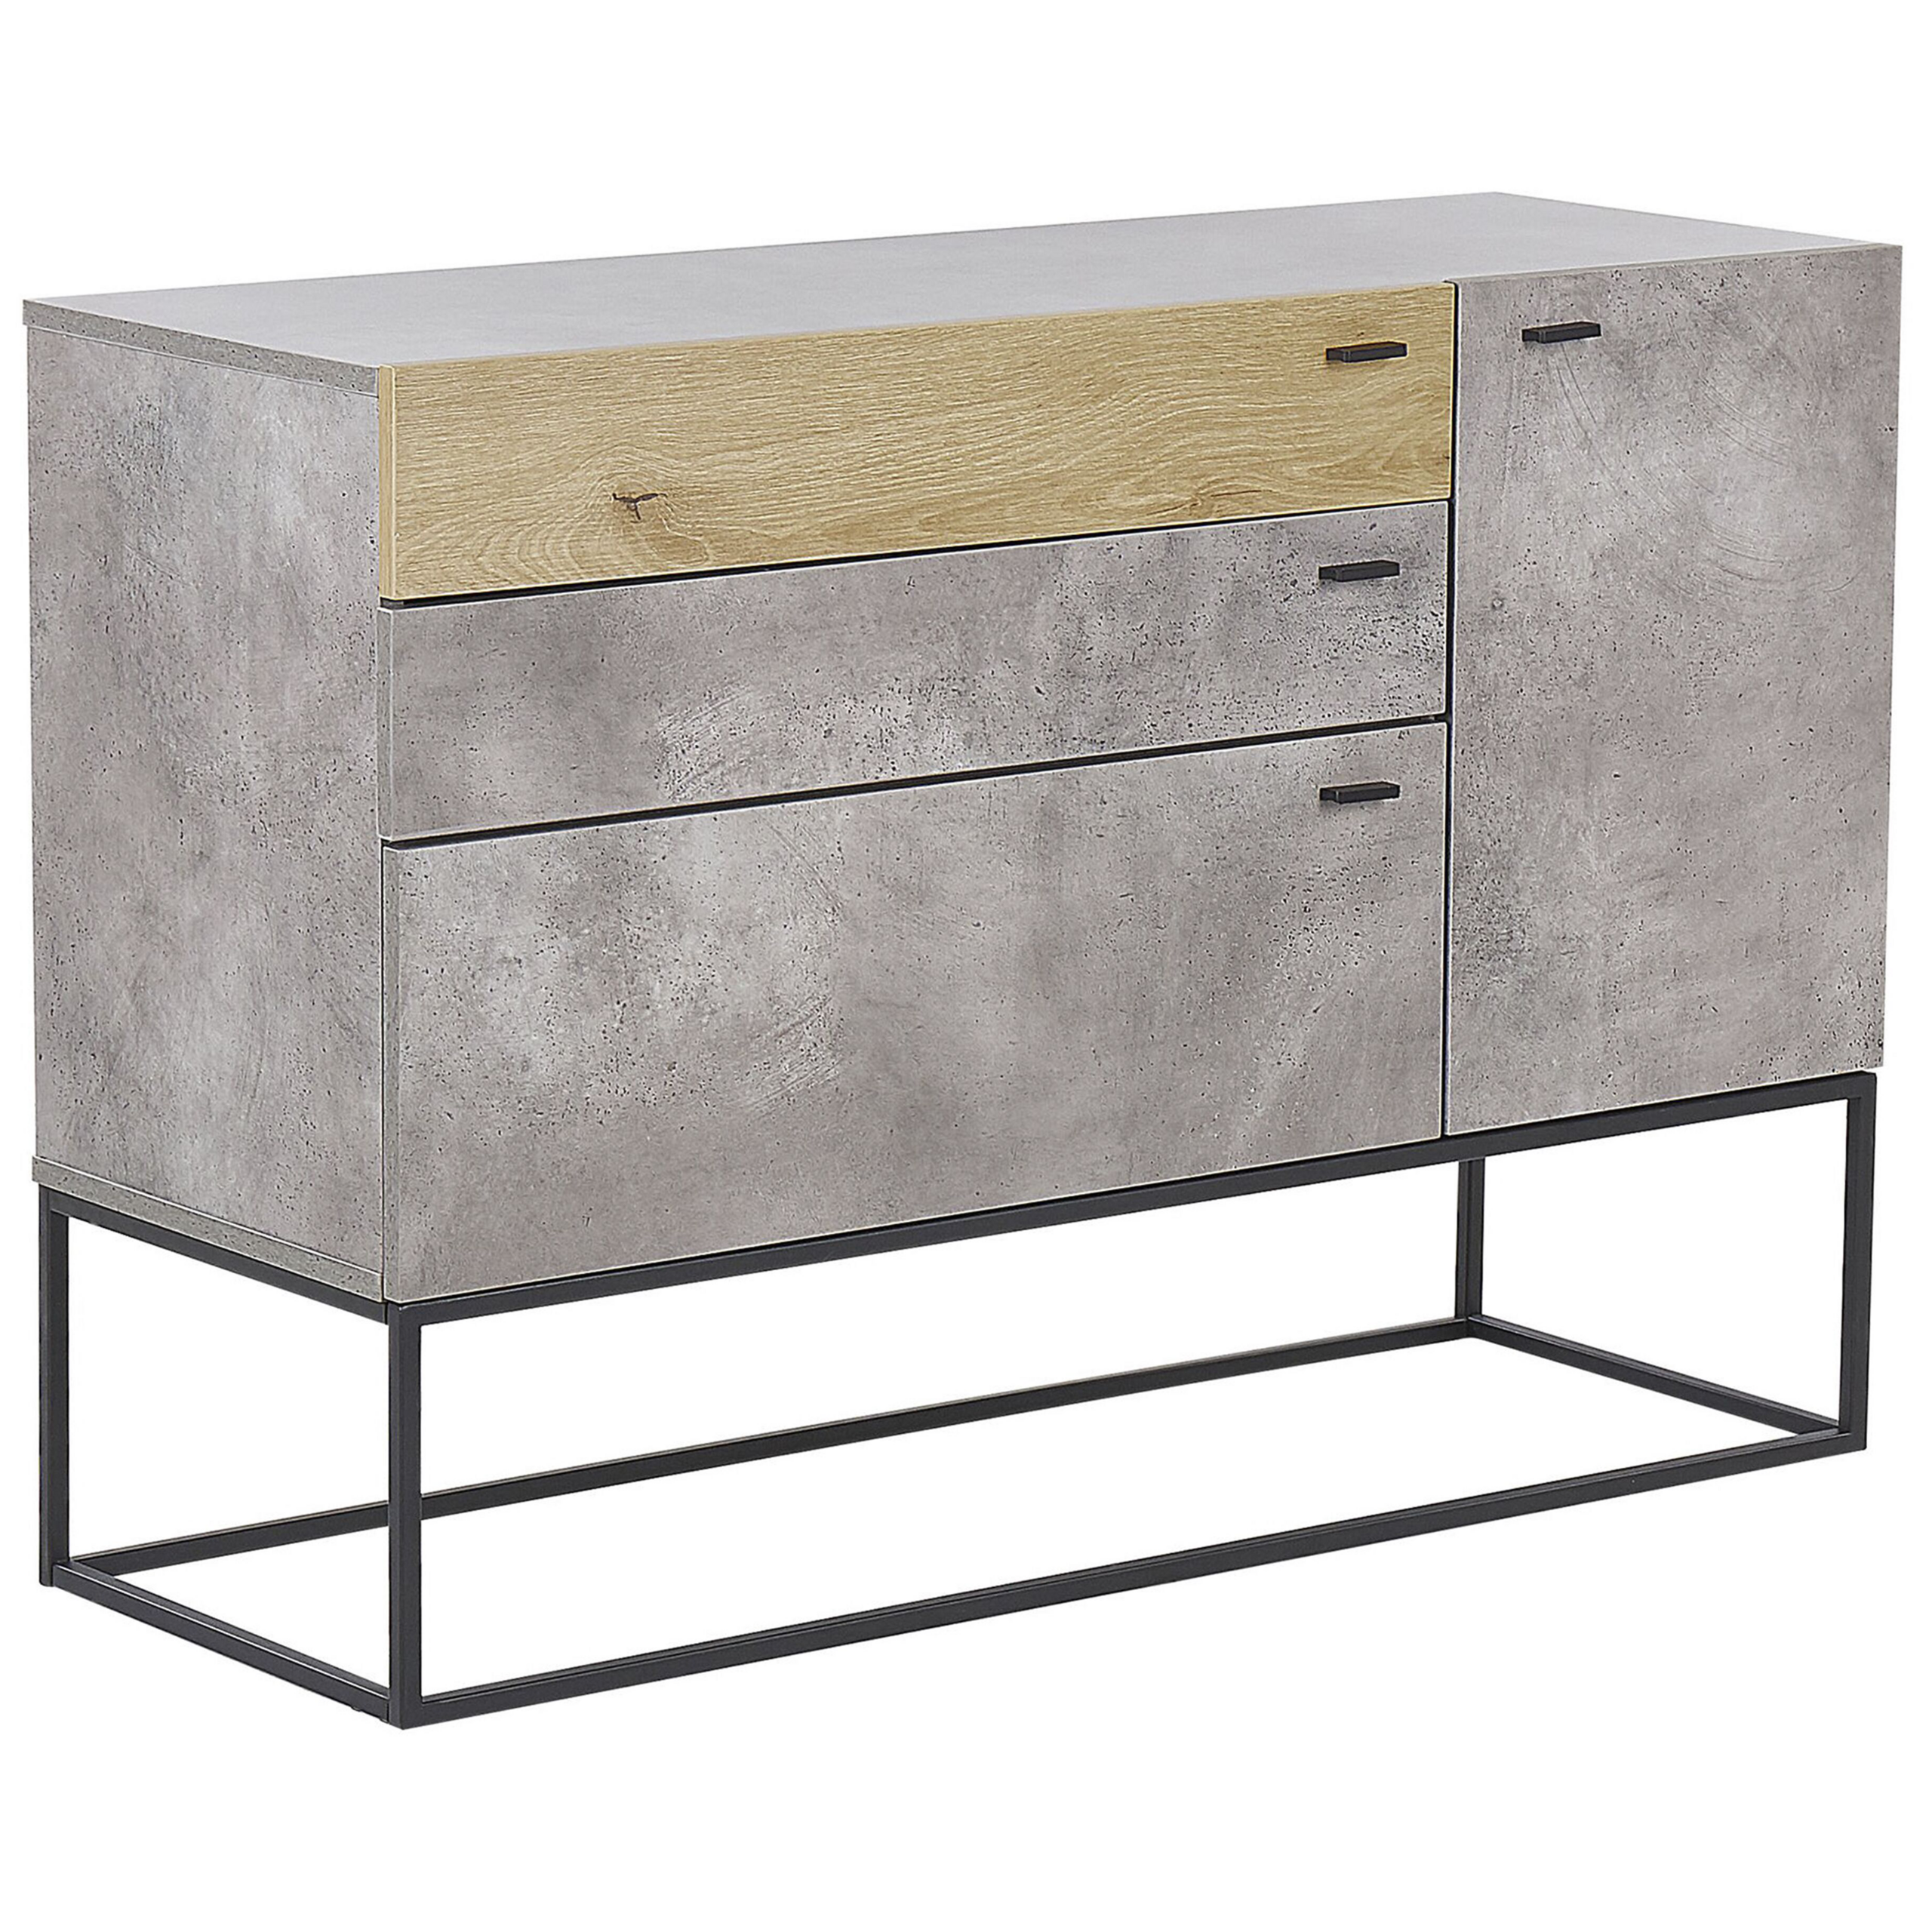 Beliani Chest of Drawers Light Wood and Grey 3 Drawers Cabinet Metal Base Industrial